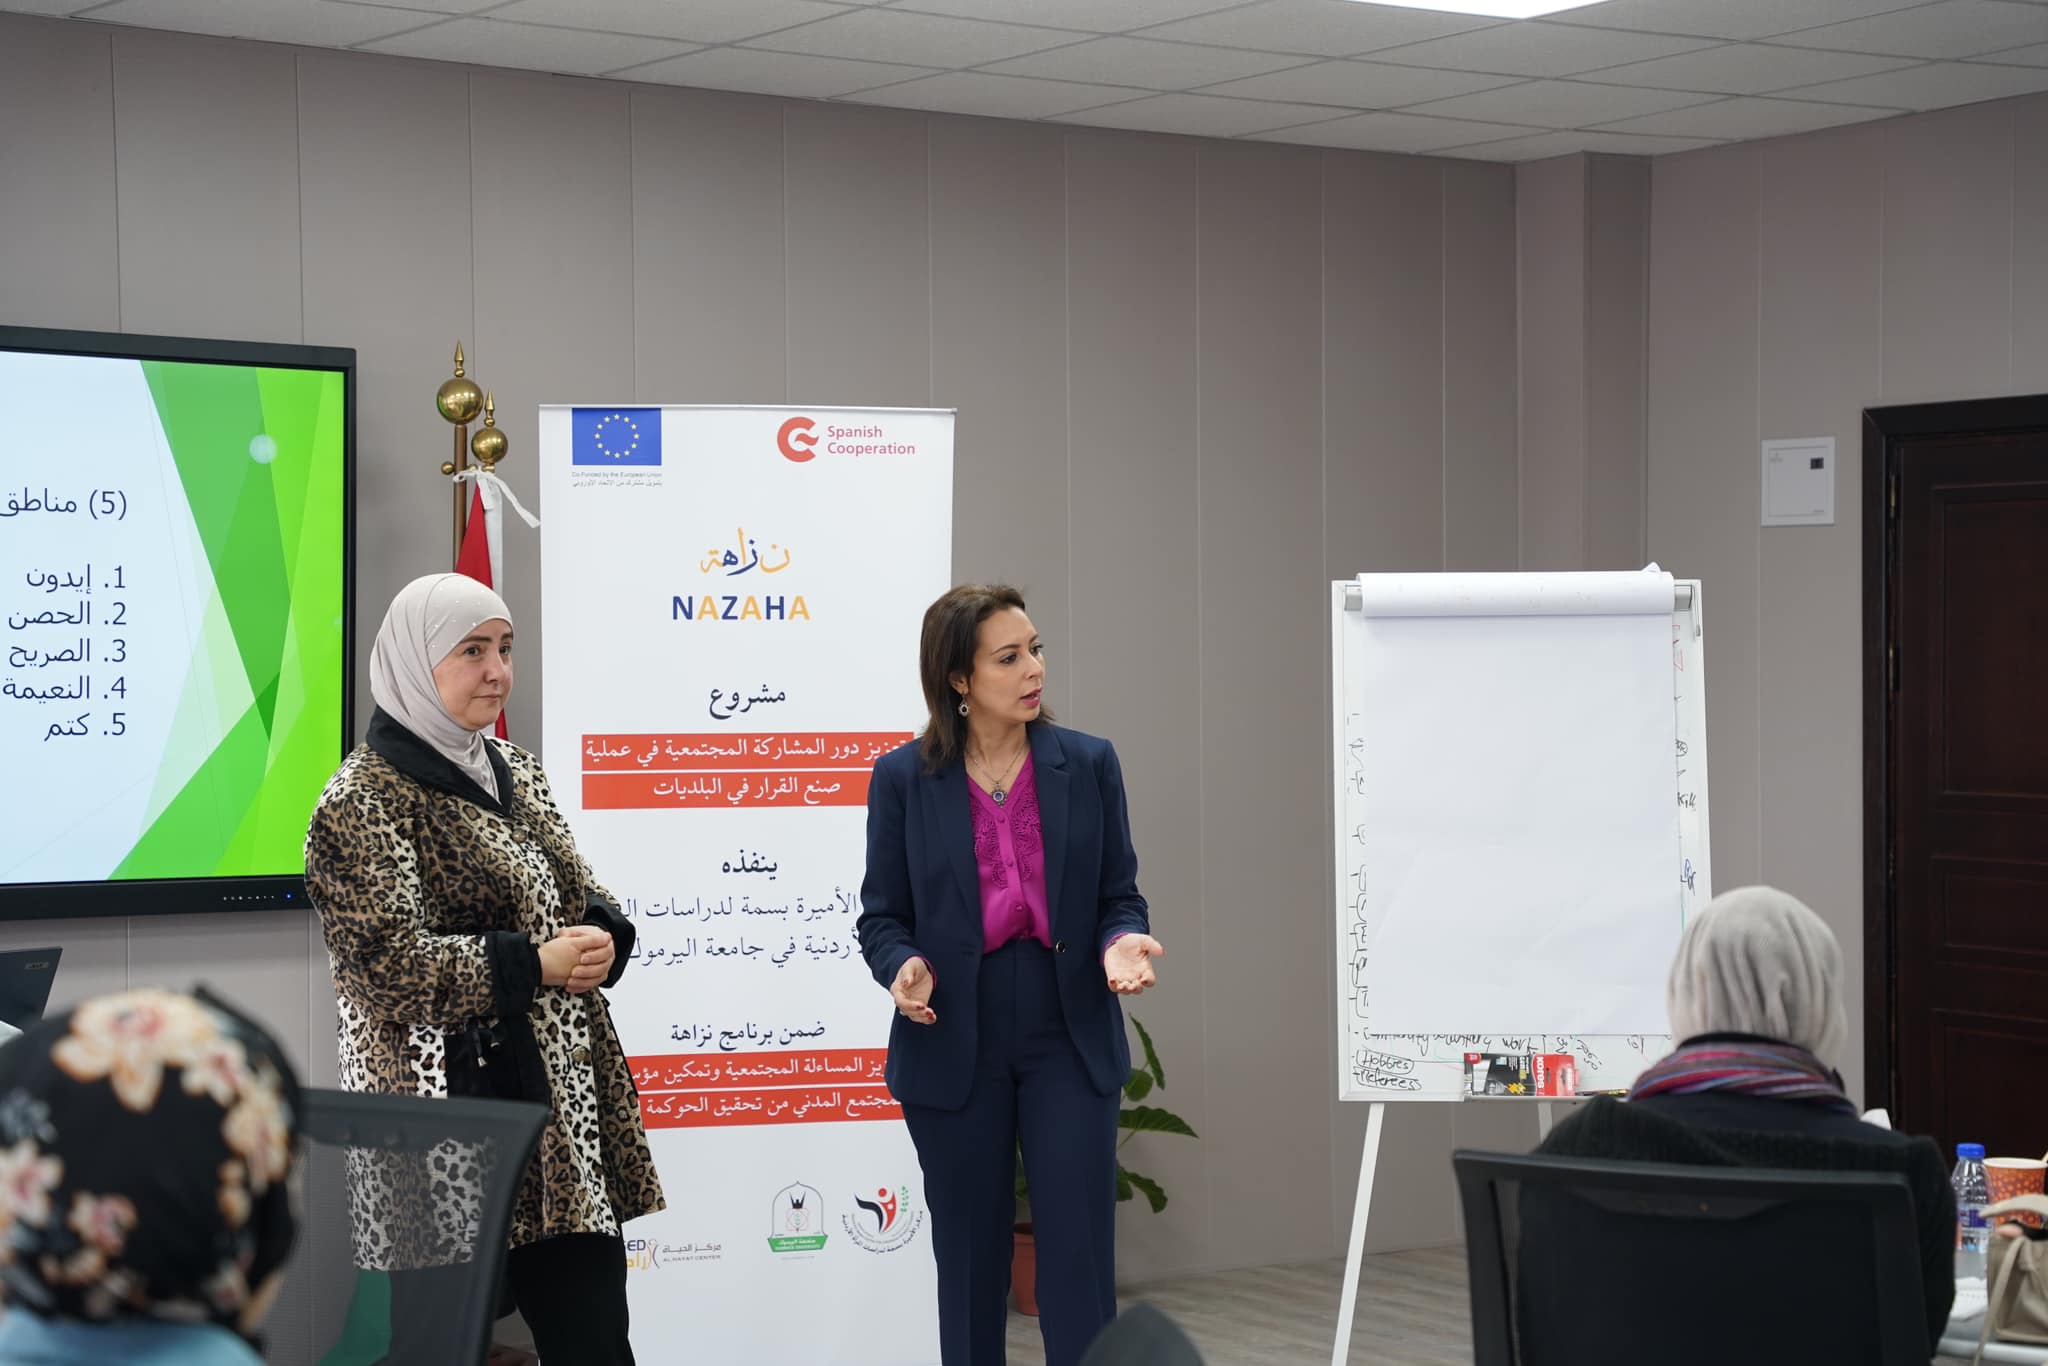 The second training day is organized by the Princess Basma Center for Jordanian Women’s Studies at Yarmouk University for a group of field researchers volunteering with the center within the project to enhance community participation in municipalities